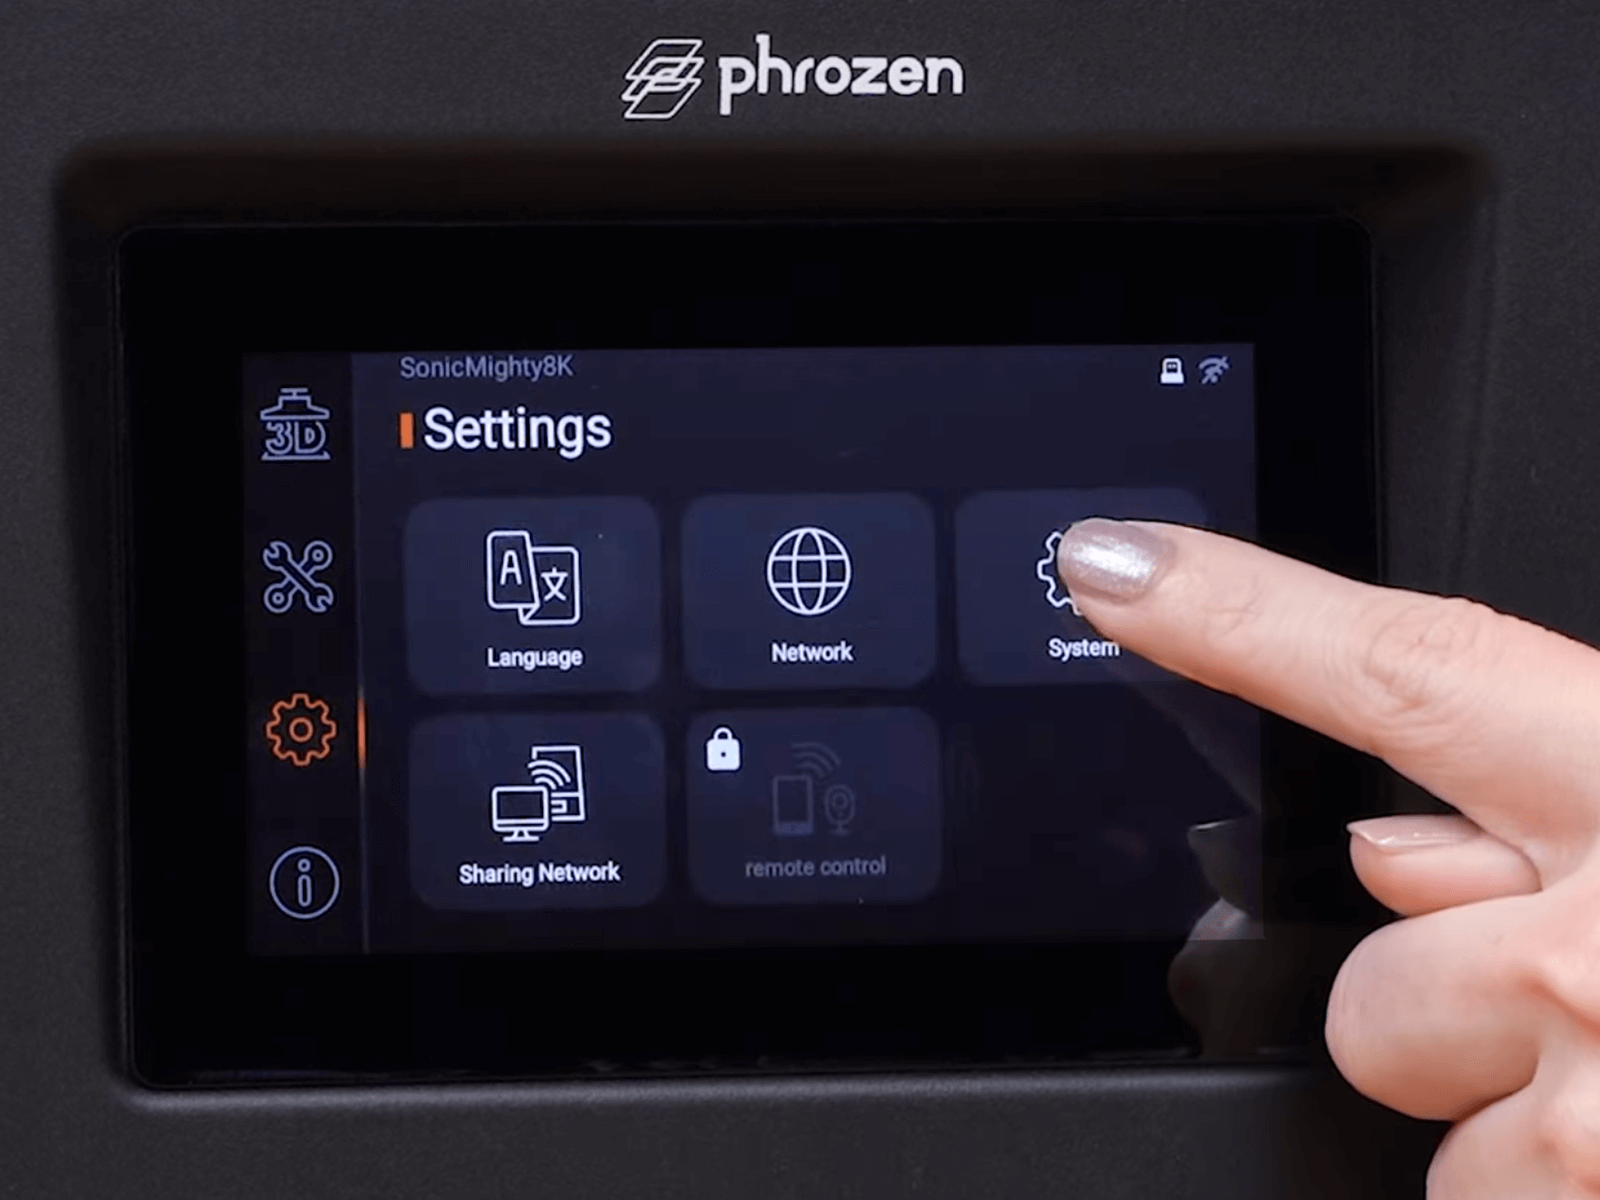 Choose System on the touch panel.